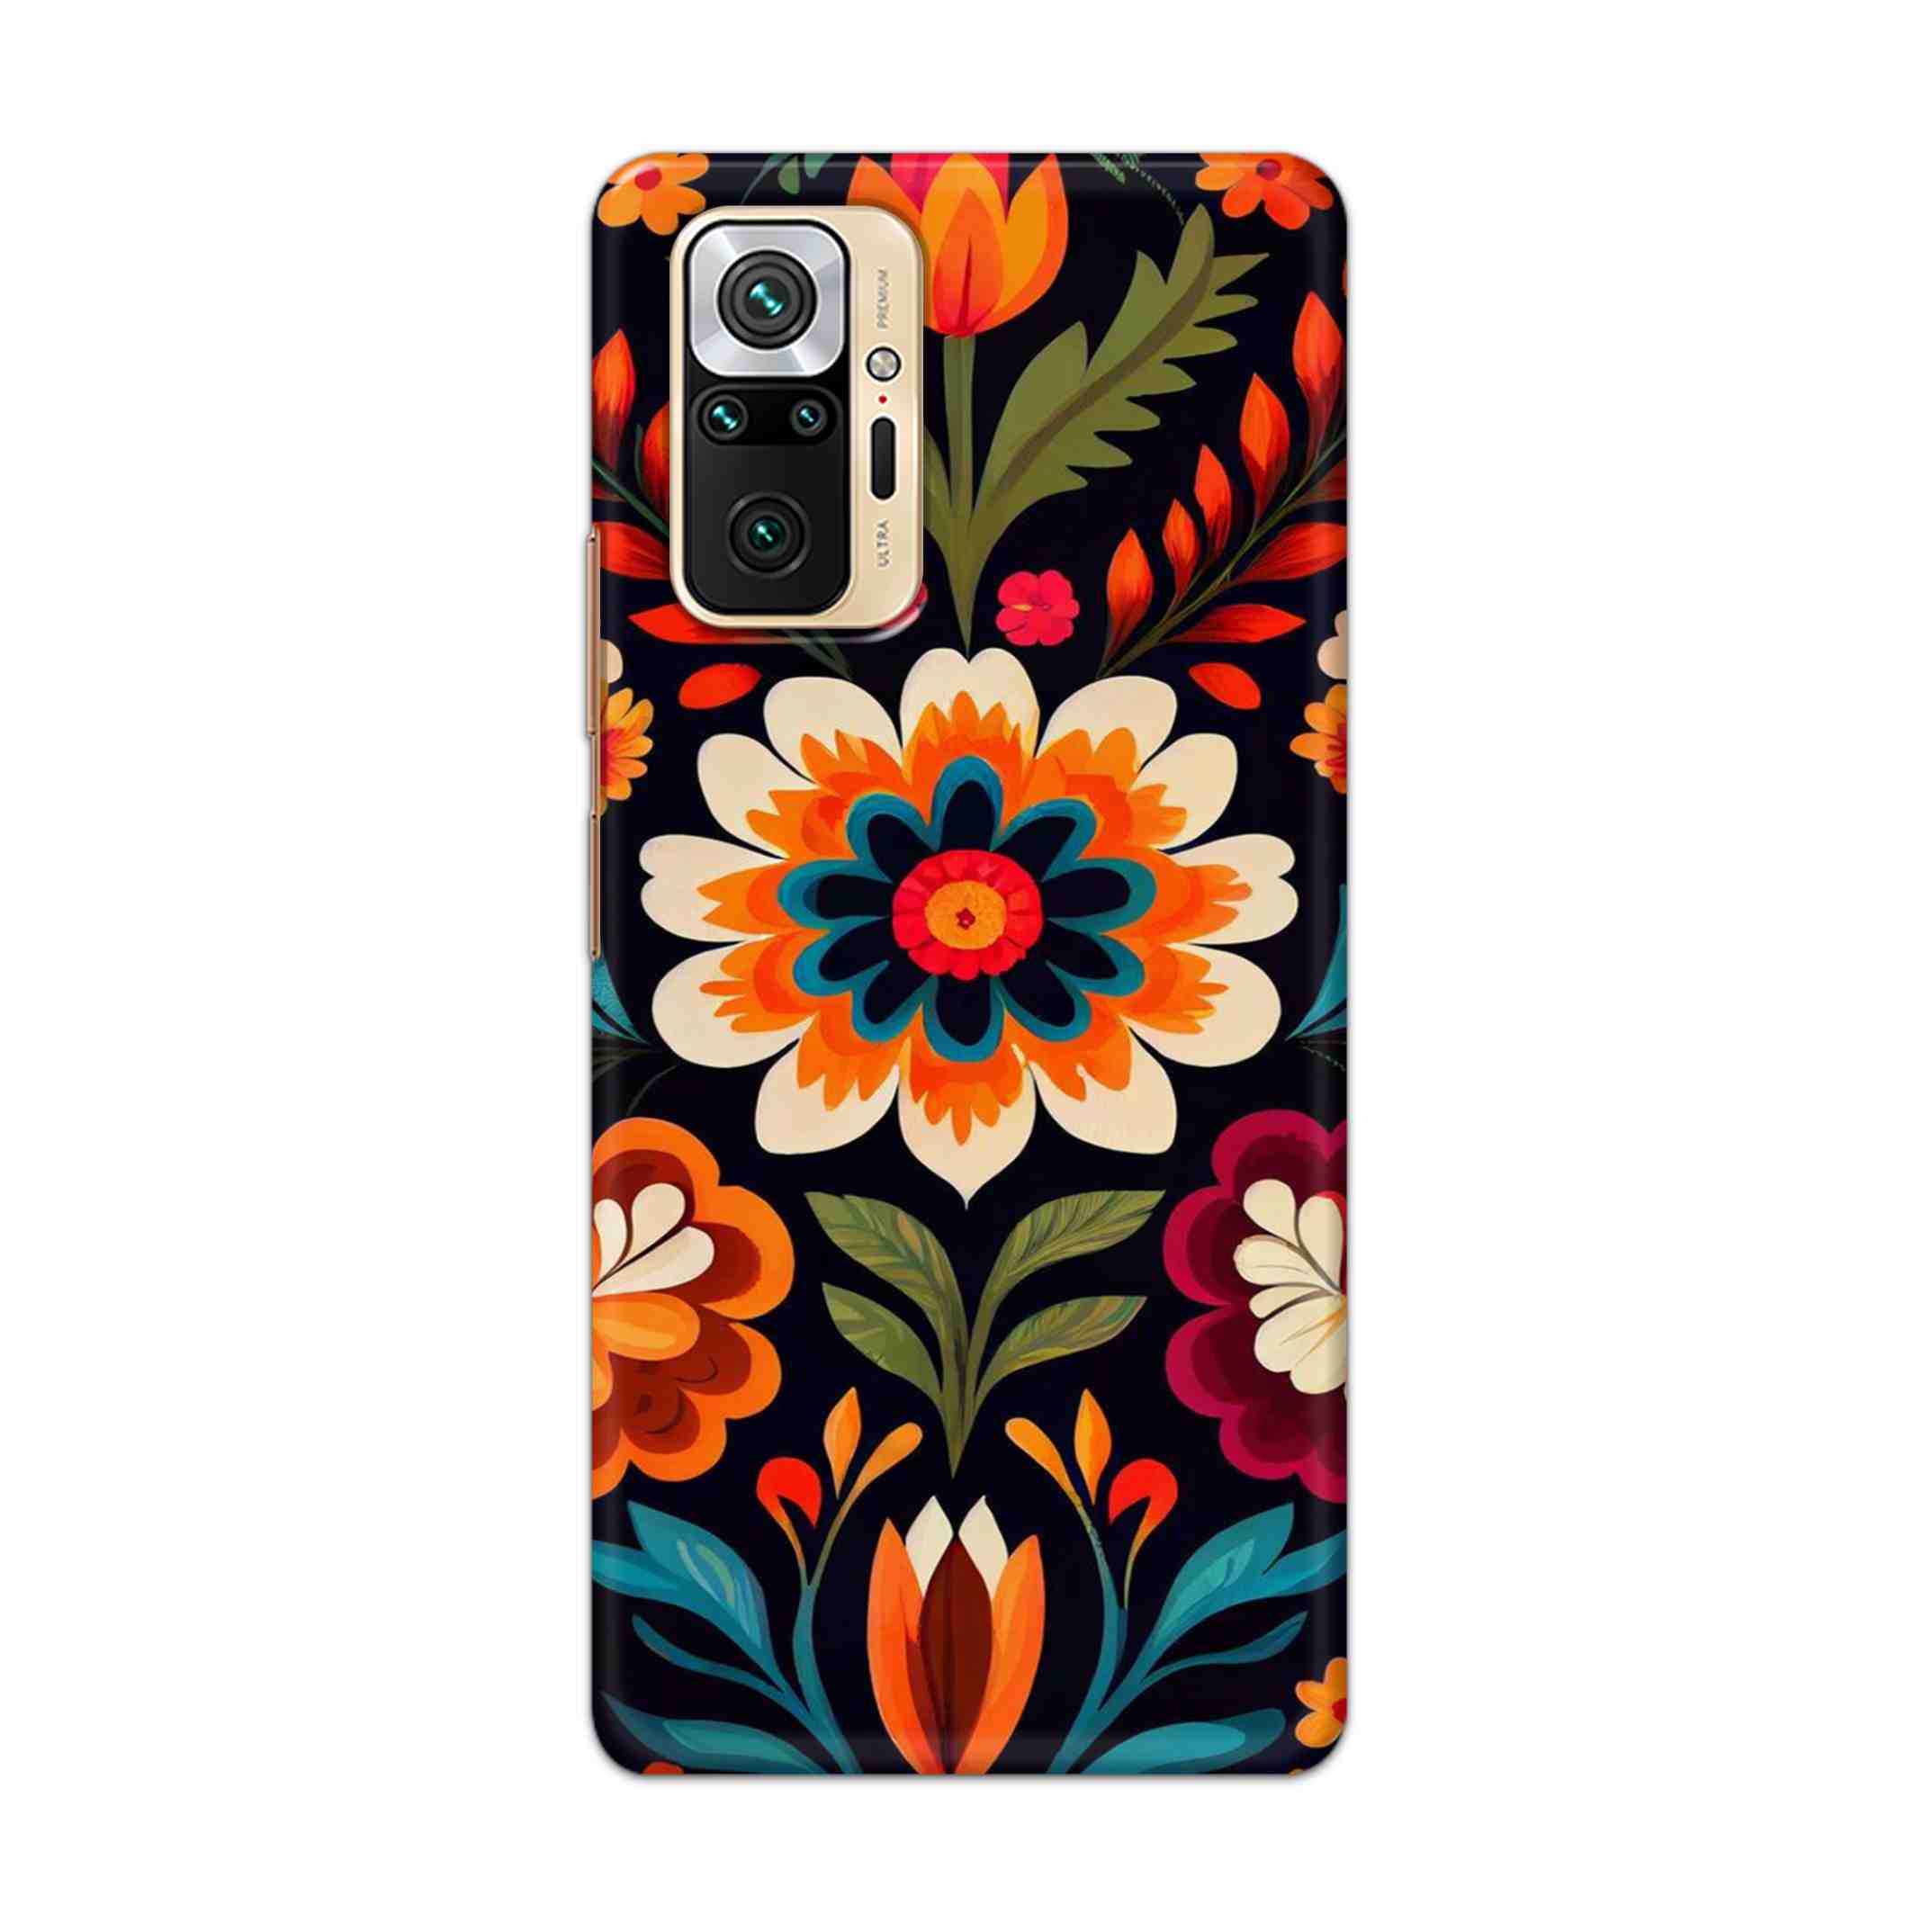 Buy Flower Hard Back Mobile Phone Case Cover For Redmi Note 10 Pro Online